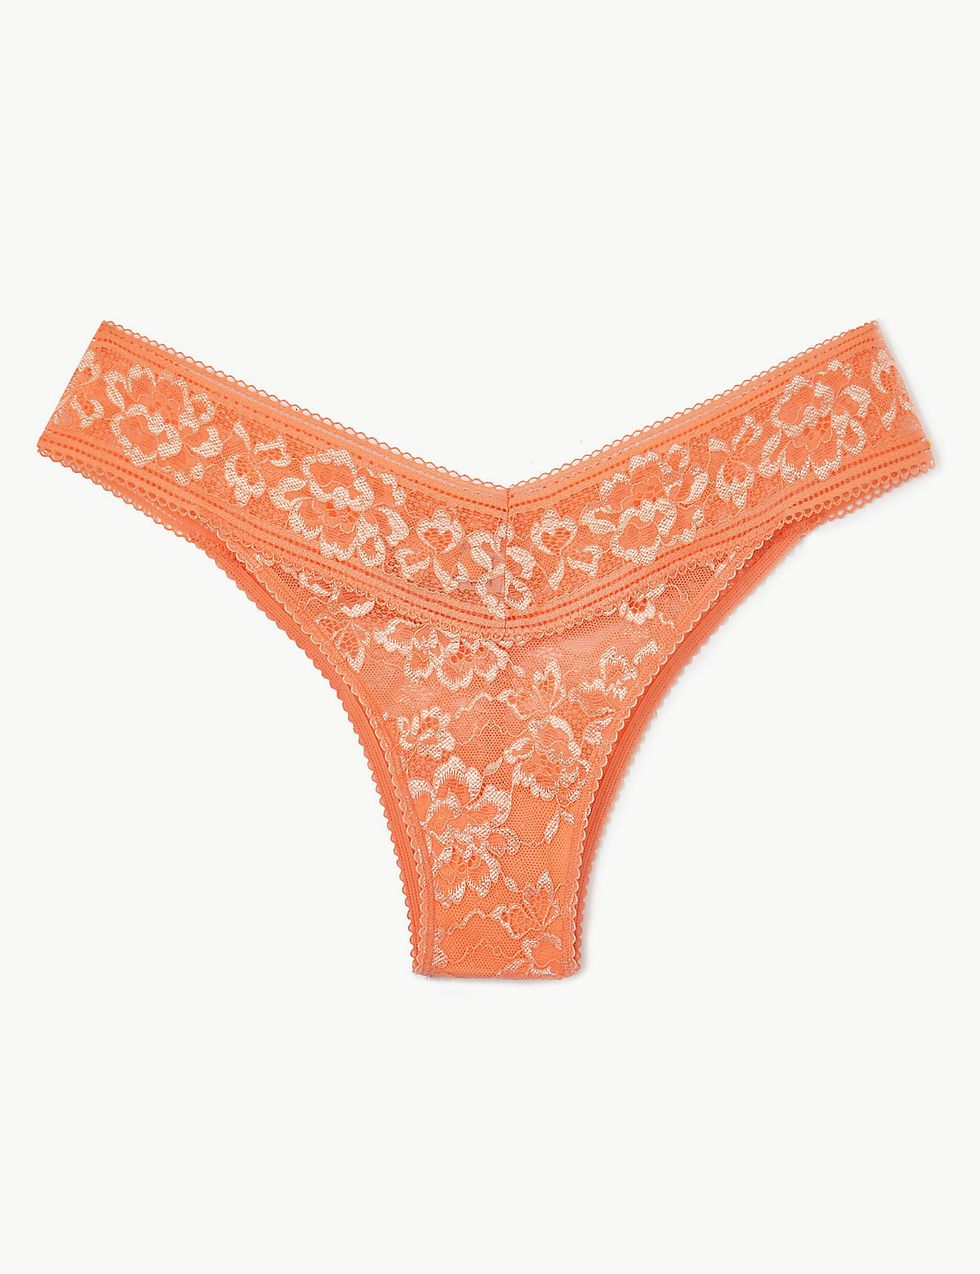 NEW! M&S Marks & Spencer fuchsia lace no VPL thong G-string